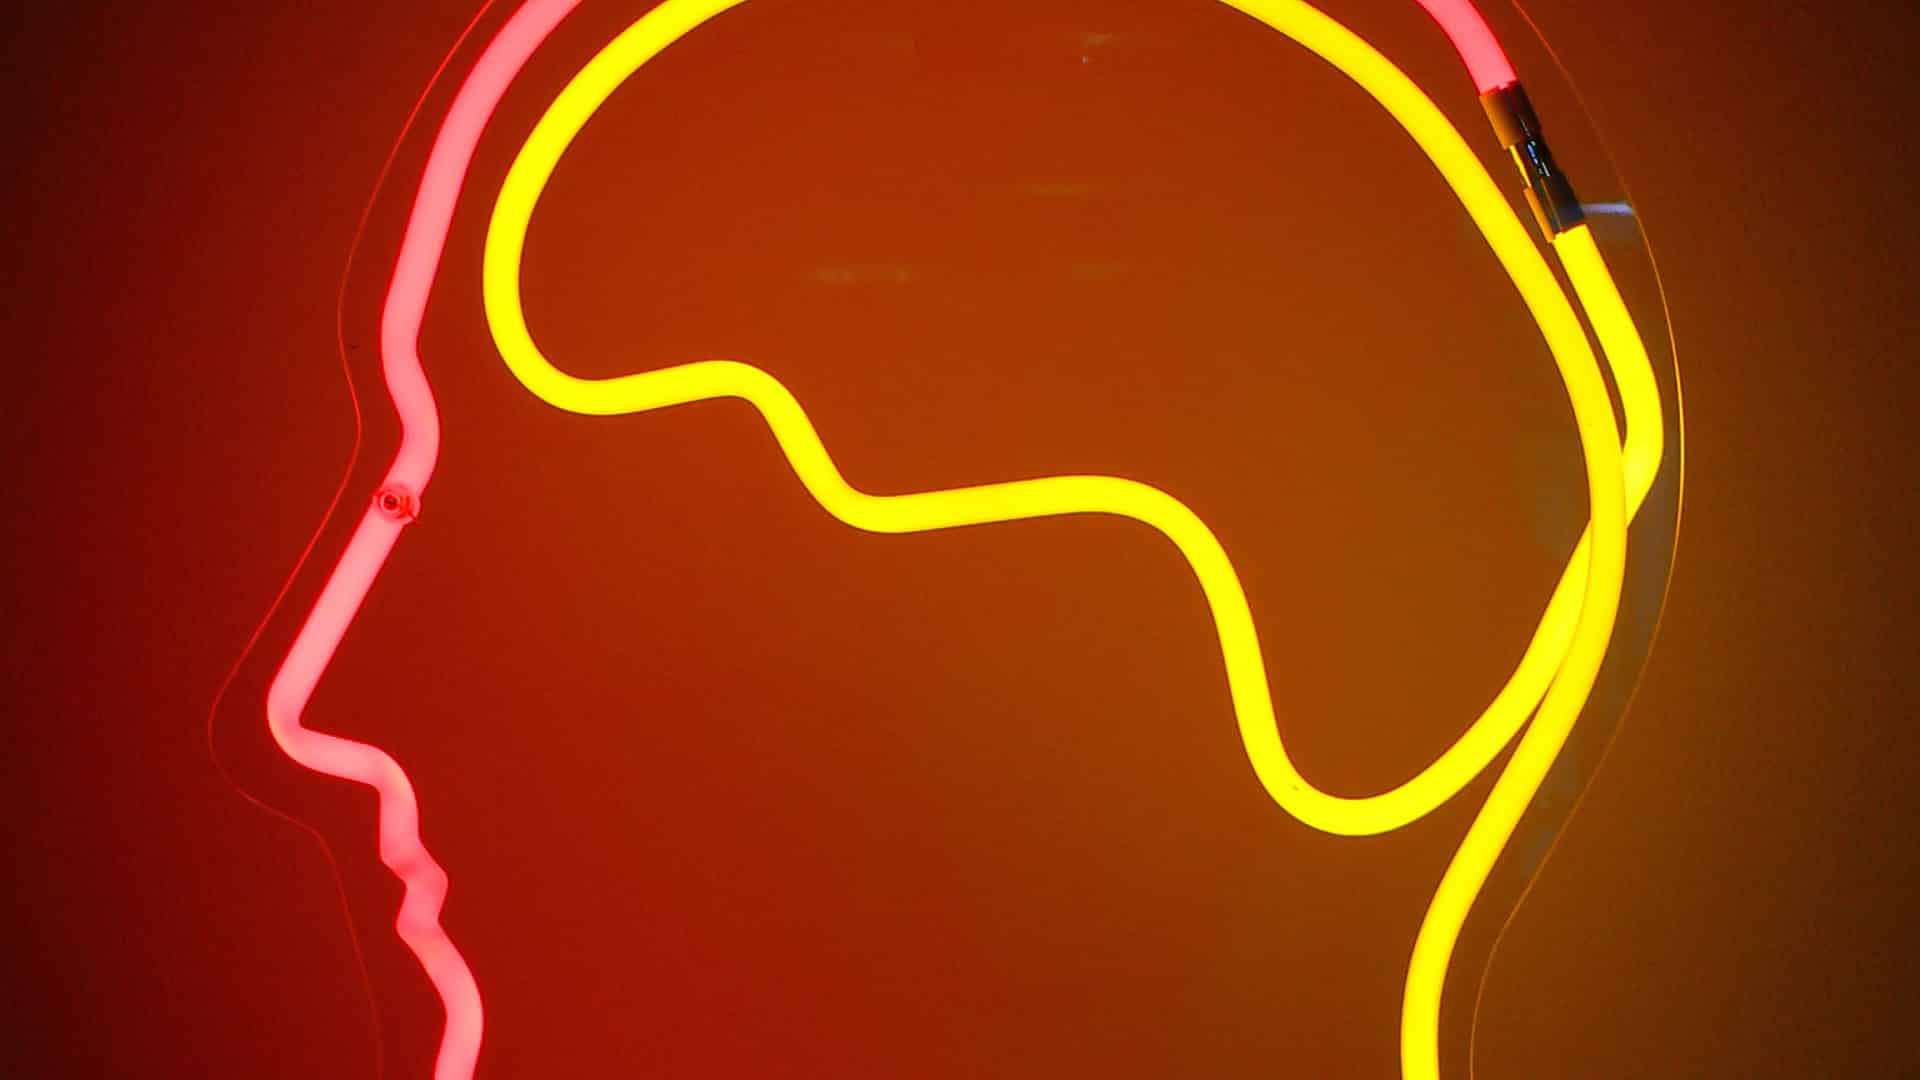 Should We Take DHA Supplements to Boost Brain Function?